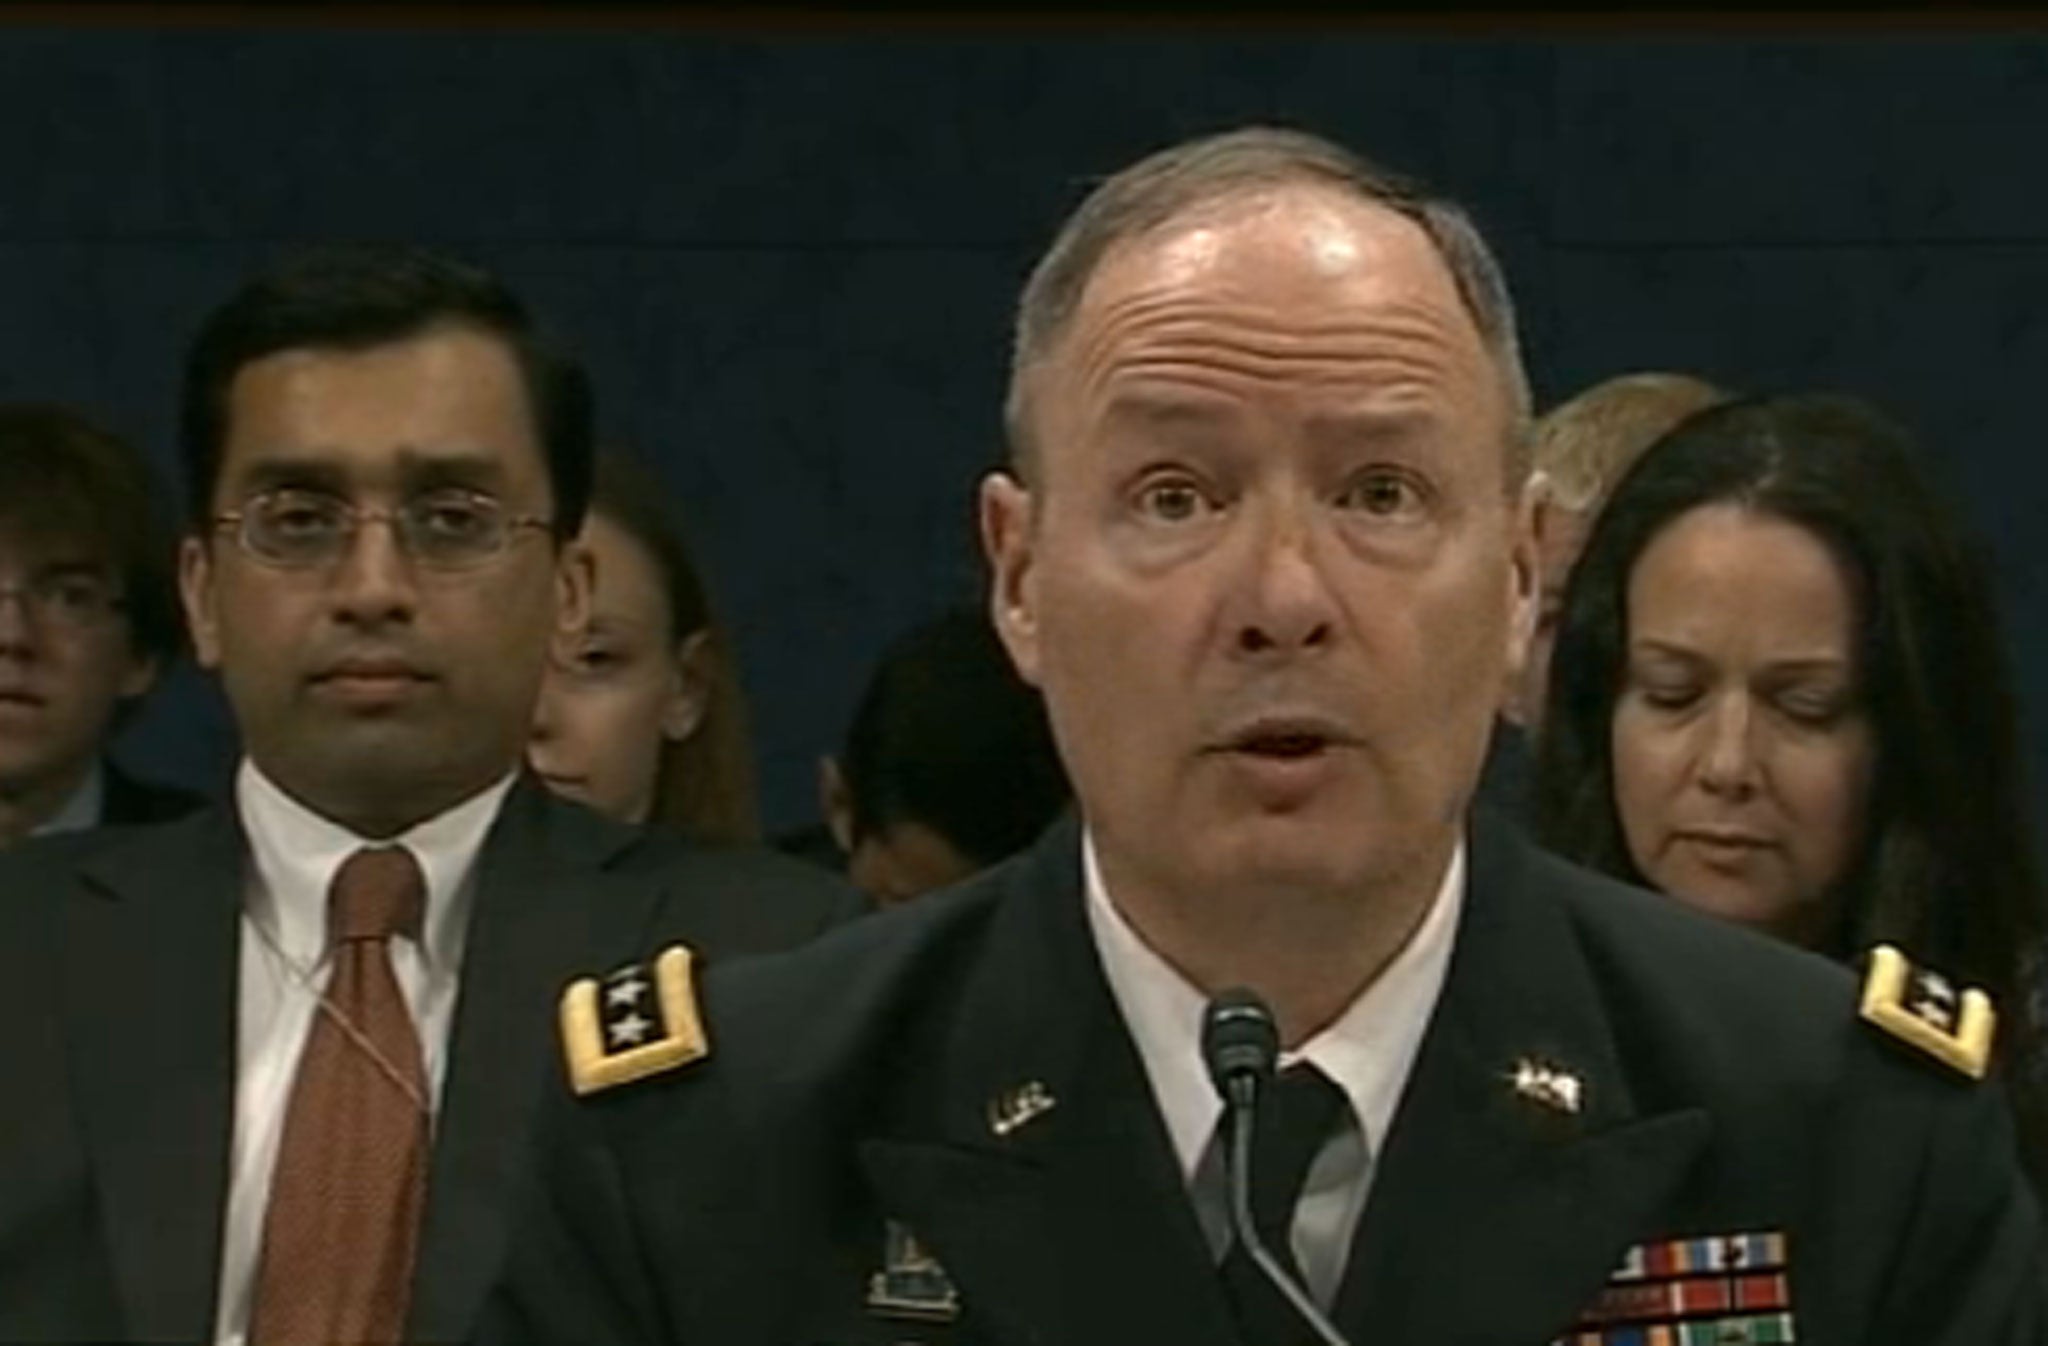 In the first public hearing dedicated to the NSA’s top-secret spying operations since former contractor Edward Snowden exposed them, General Keith Alexander defended the monitoring as legal, closely supervised and crucial to defending Americans, adding it was not “some rogue operation”